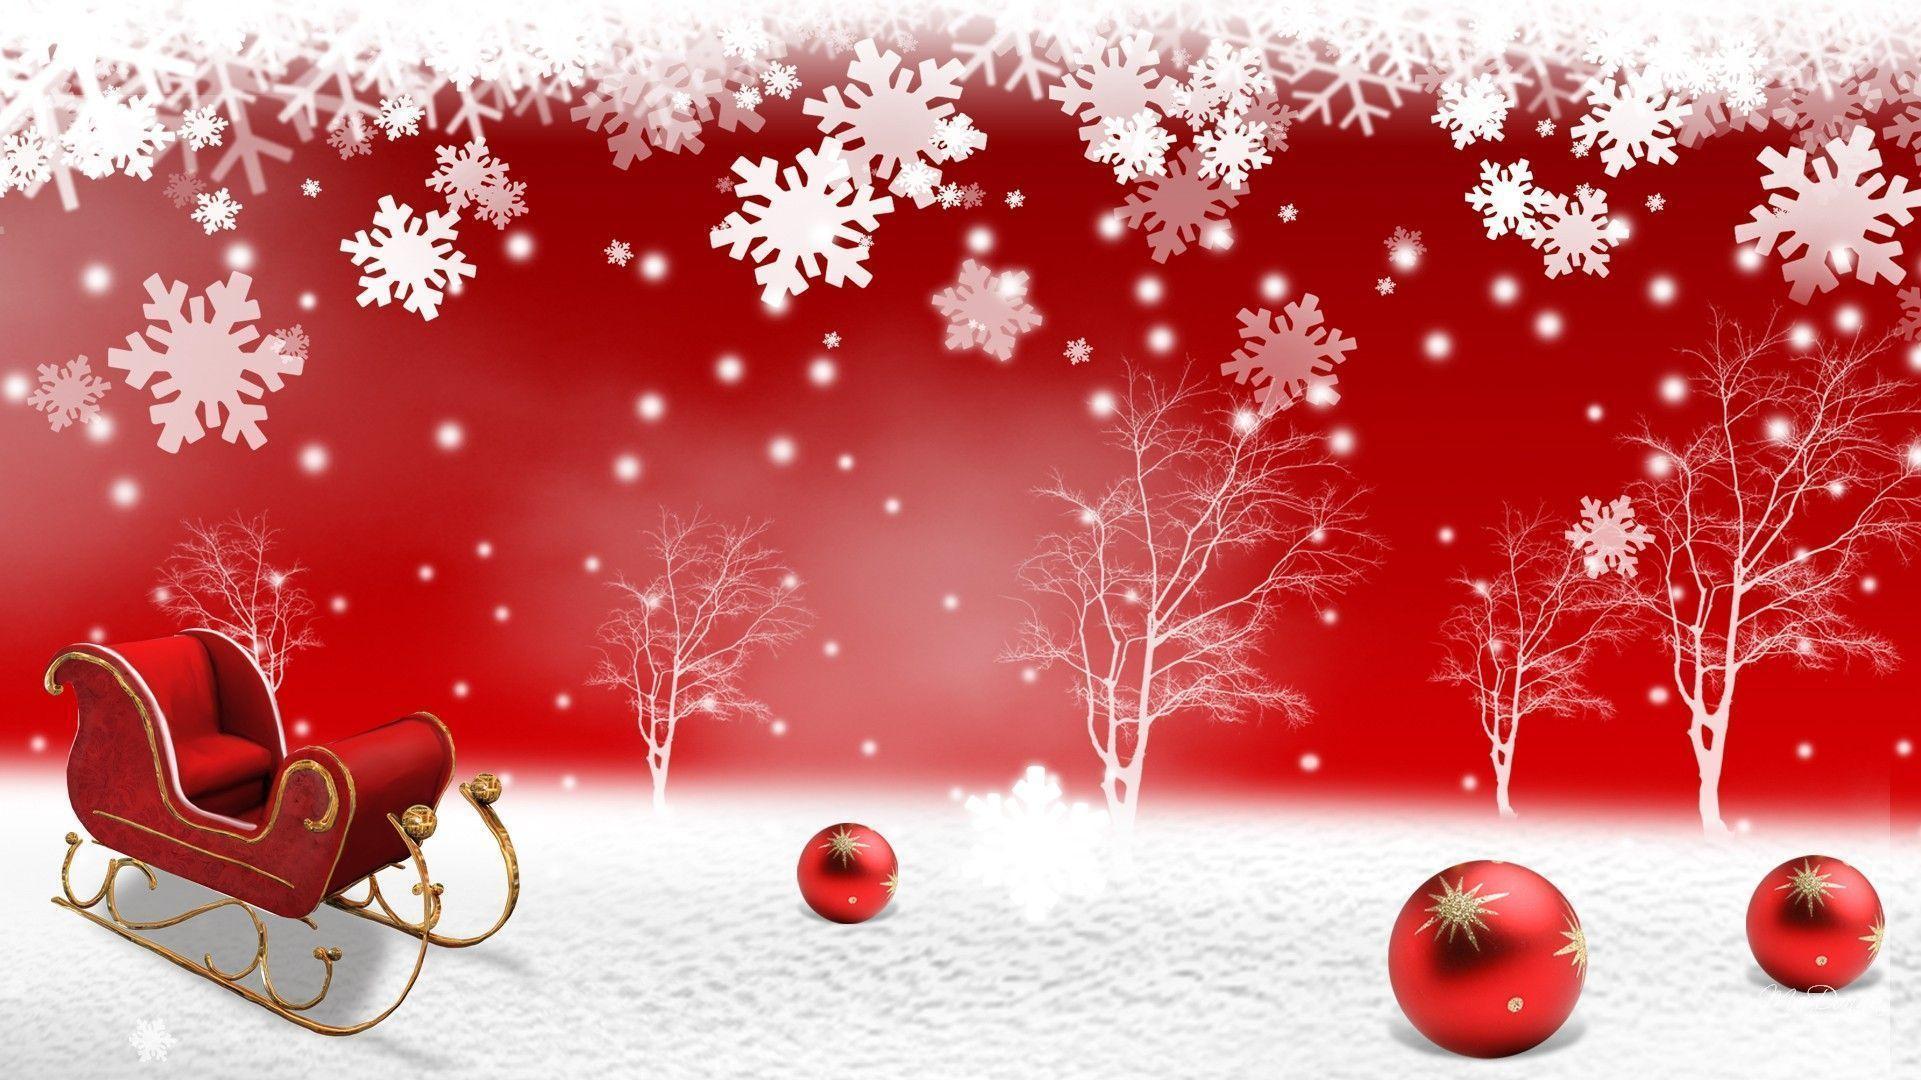 Wallpaper For > Red Christmas Snowflake Background